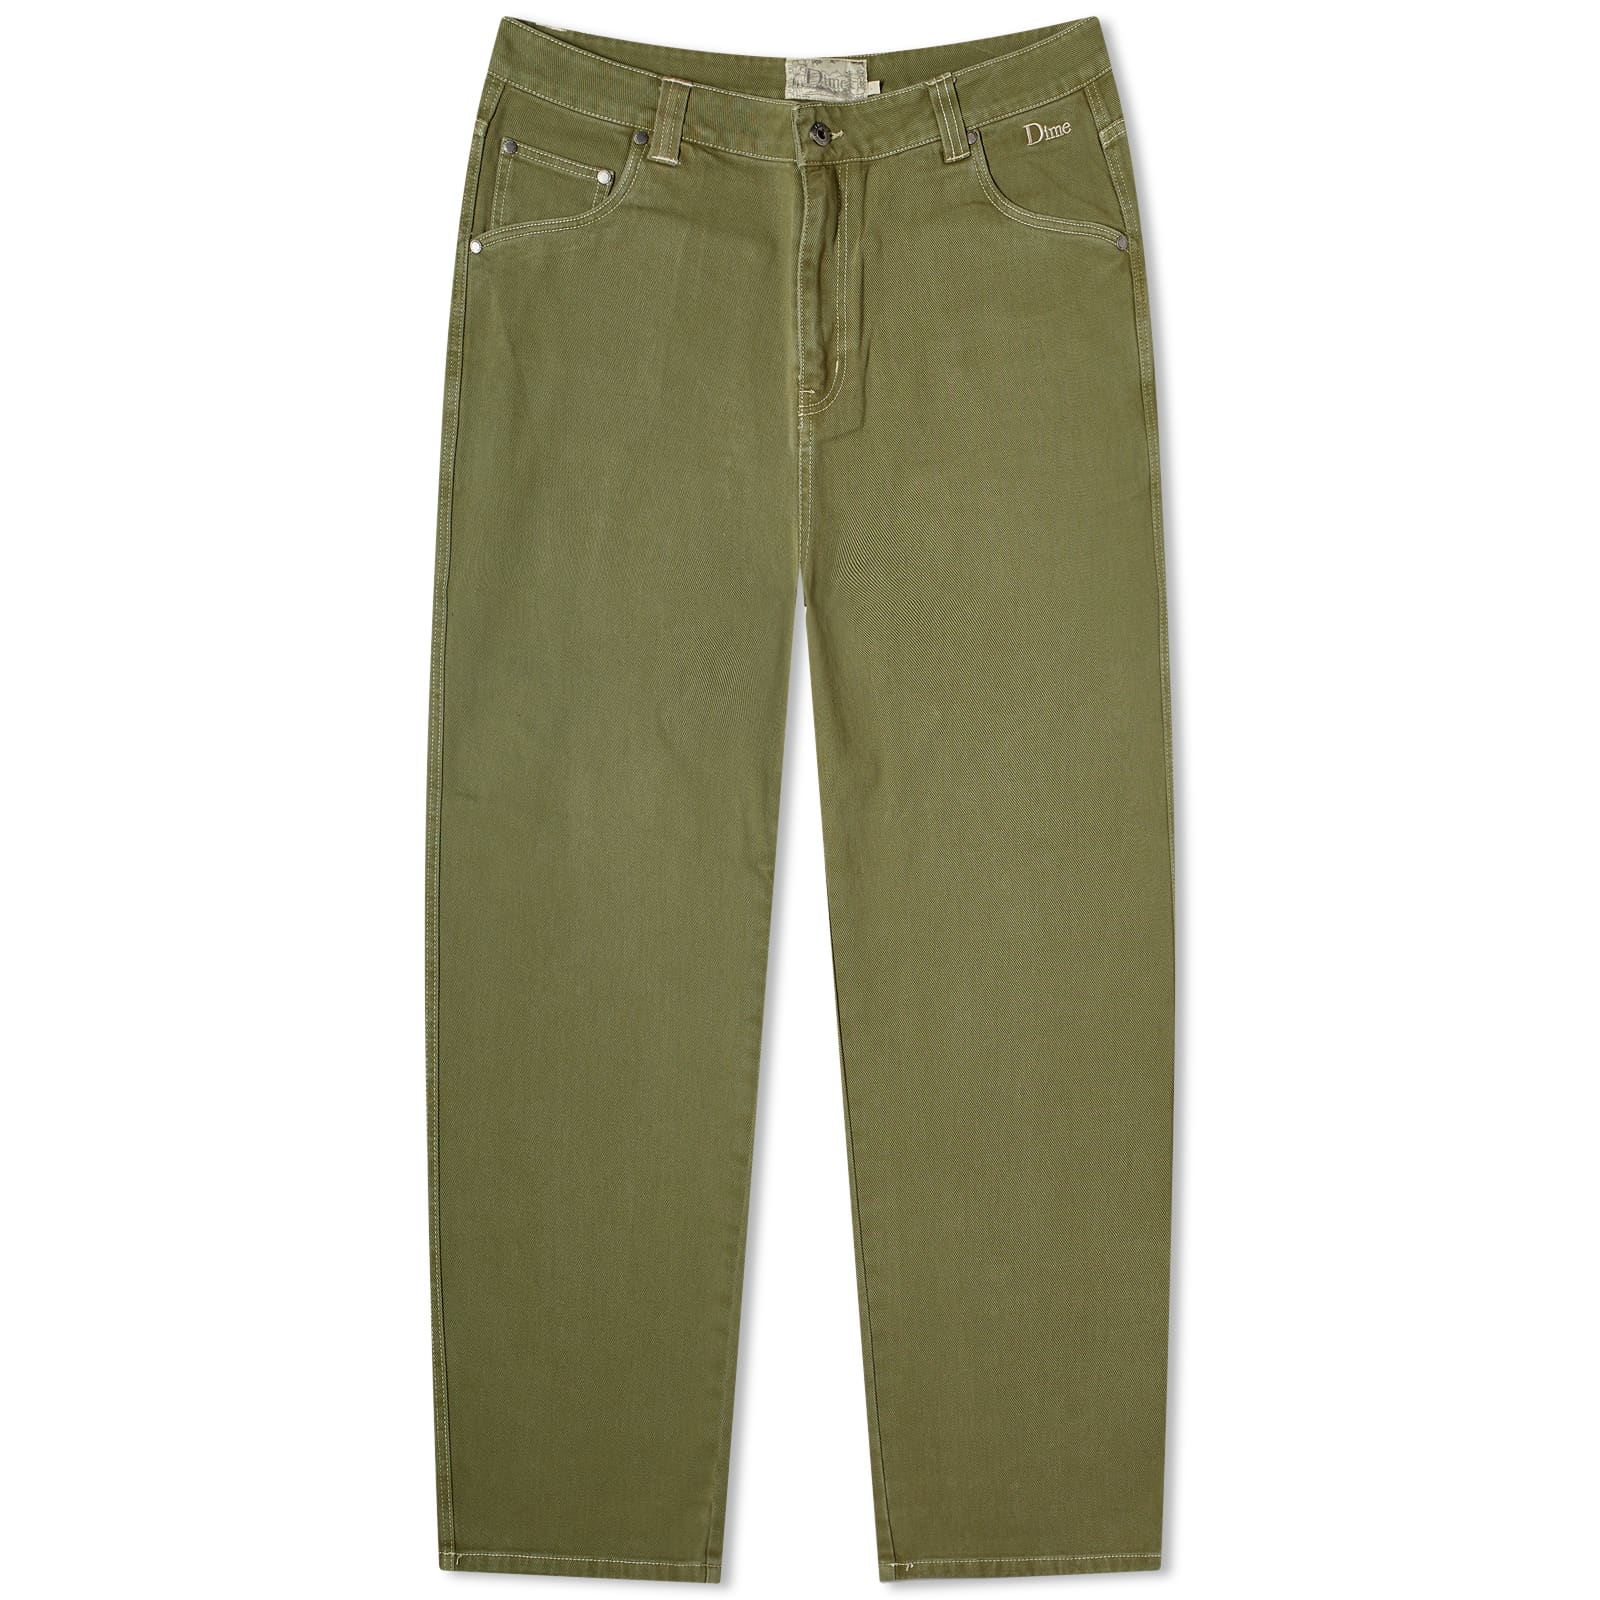 Брюки Dime Classic Relaxed Denim Pant, цвет Washed Green